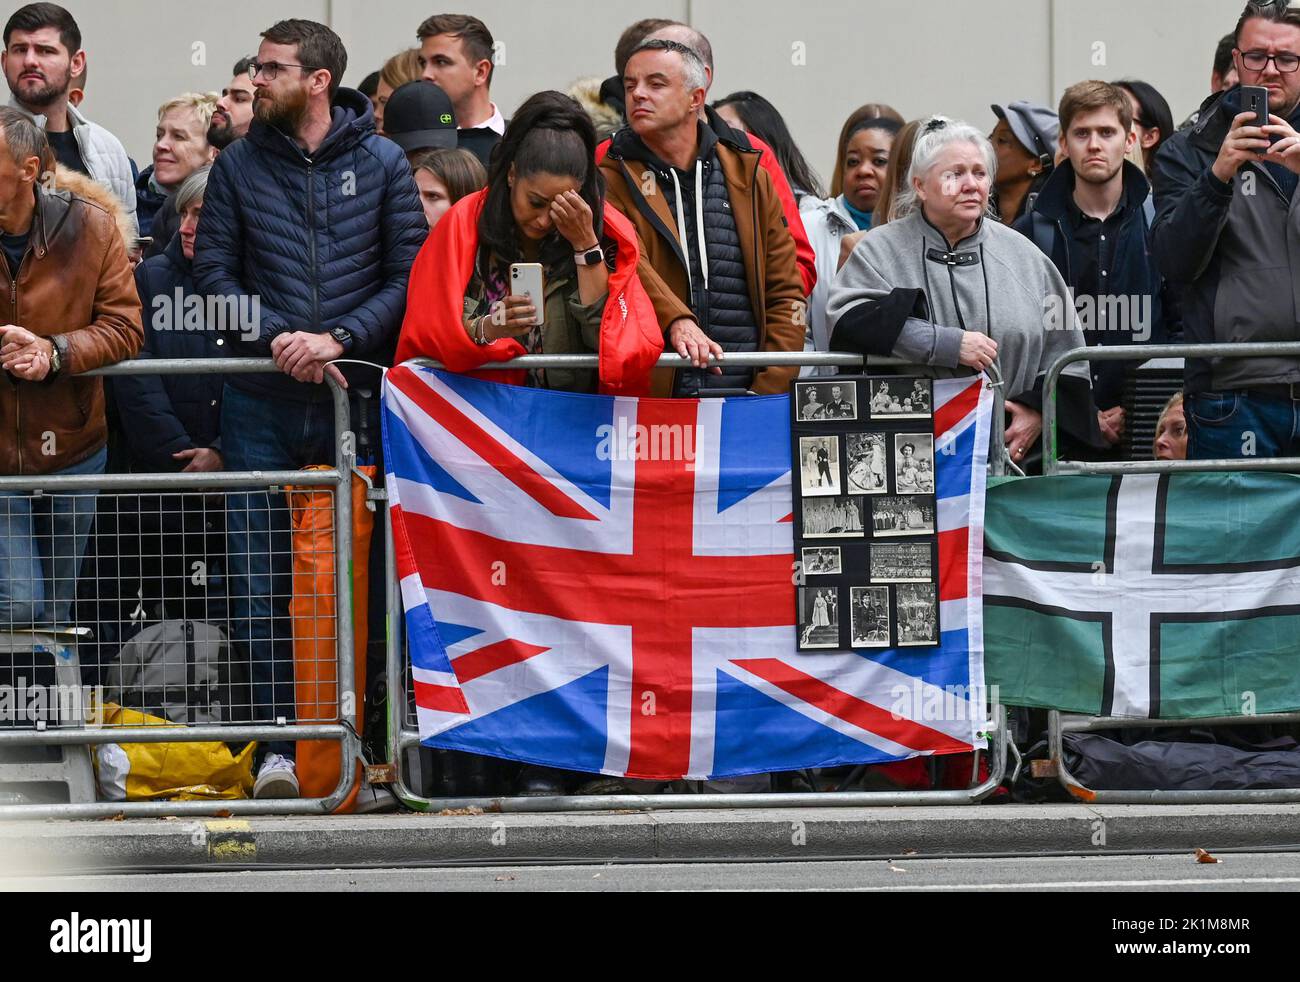 London, UK. 19th Sep, 2022. London UK 19th September 2022 - Emotional moments for  the crowd  in Whitehall during the funeral procession of Queen Elizabeth II in London today: Credit Simon Dack / Alamy Live News Credit: Simon Dack News/Alamy Live News Stock Photo